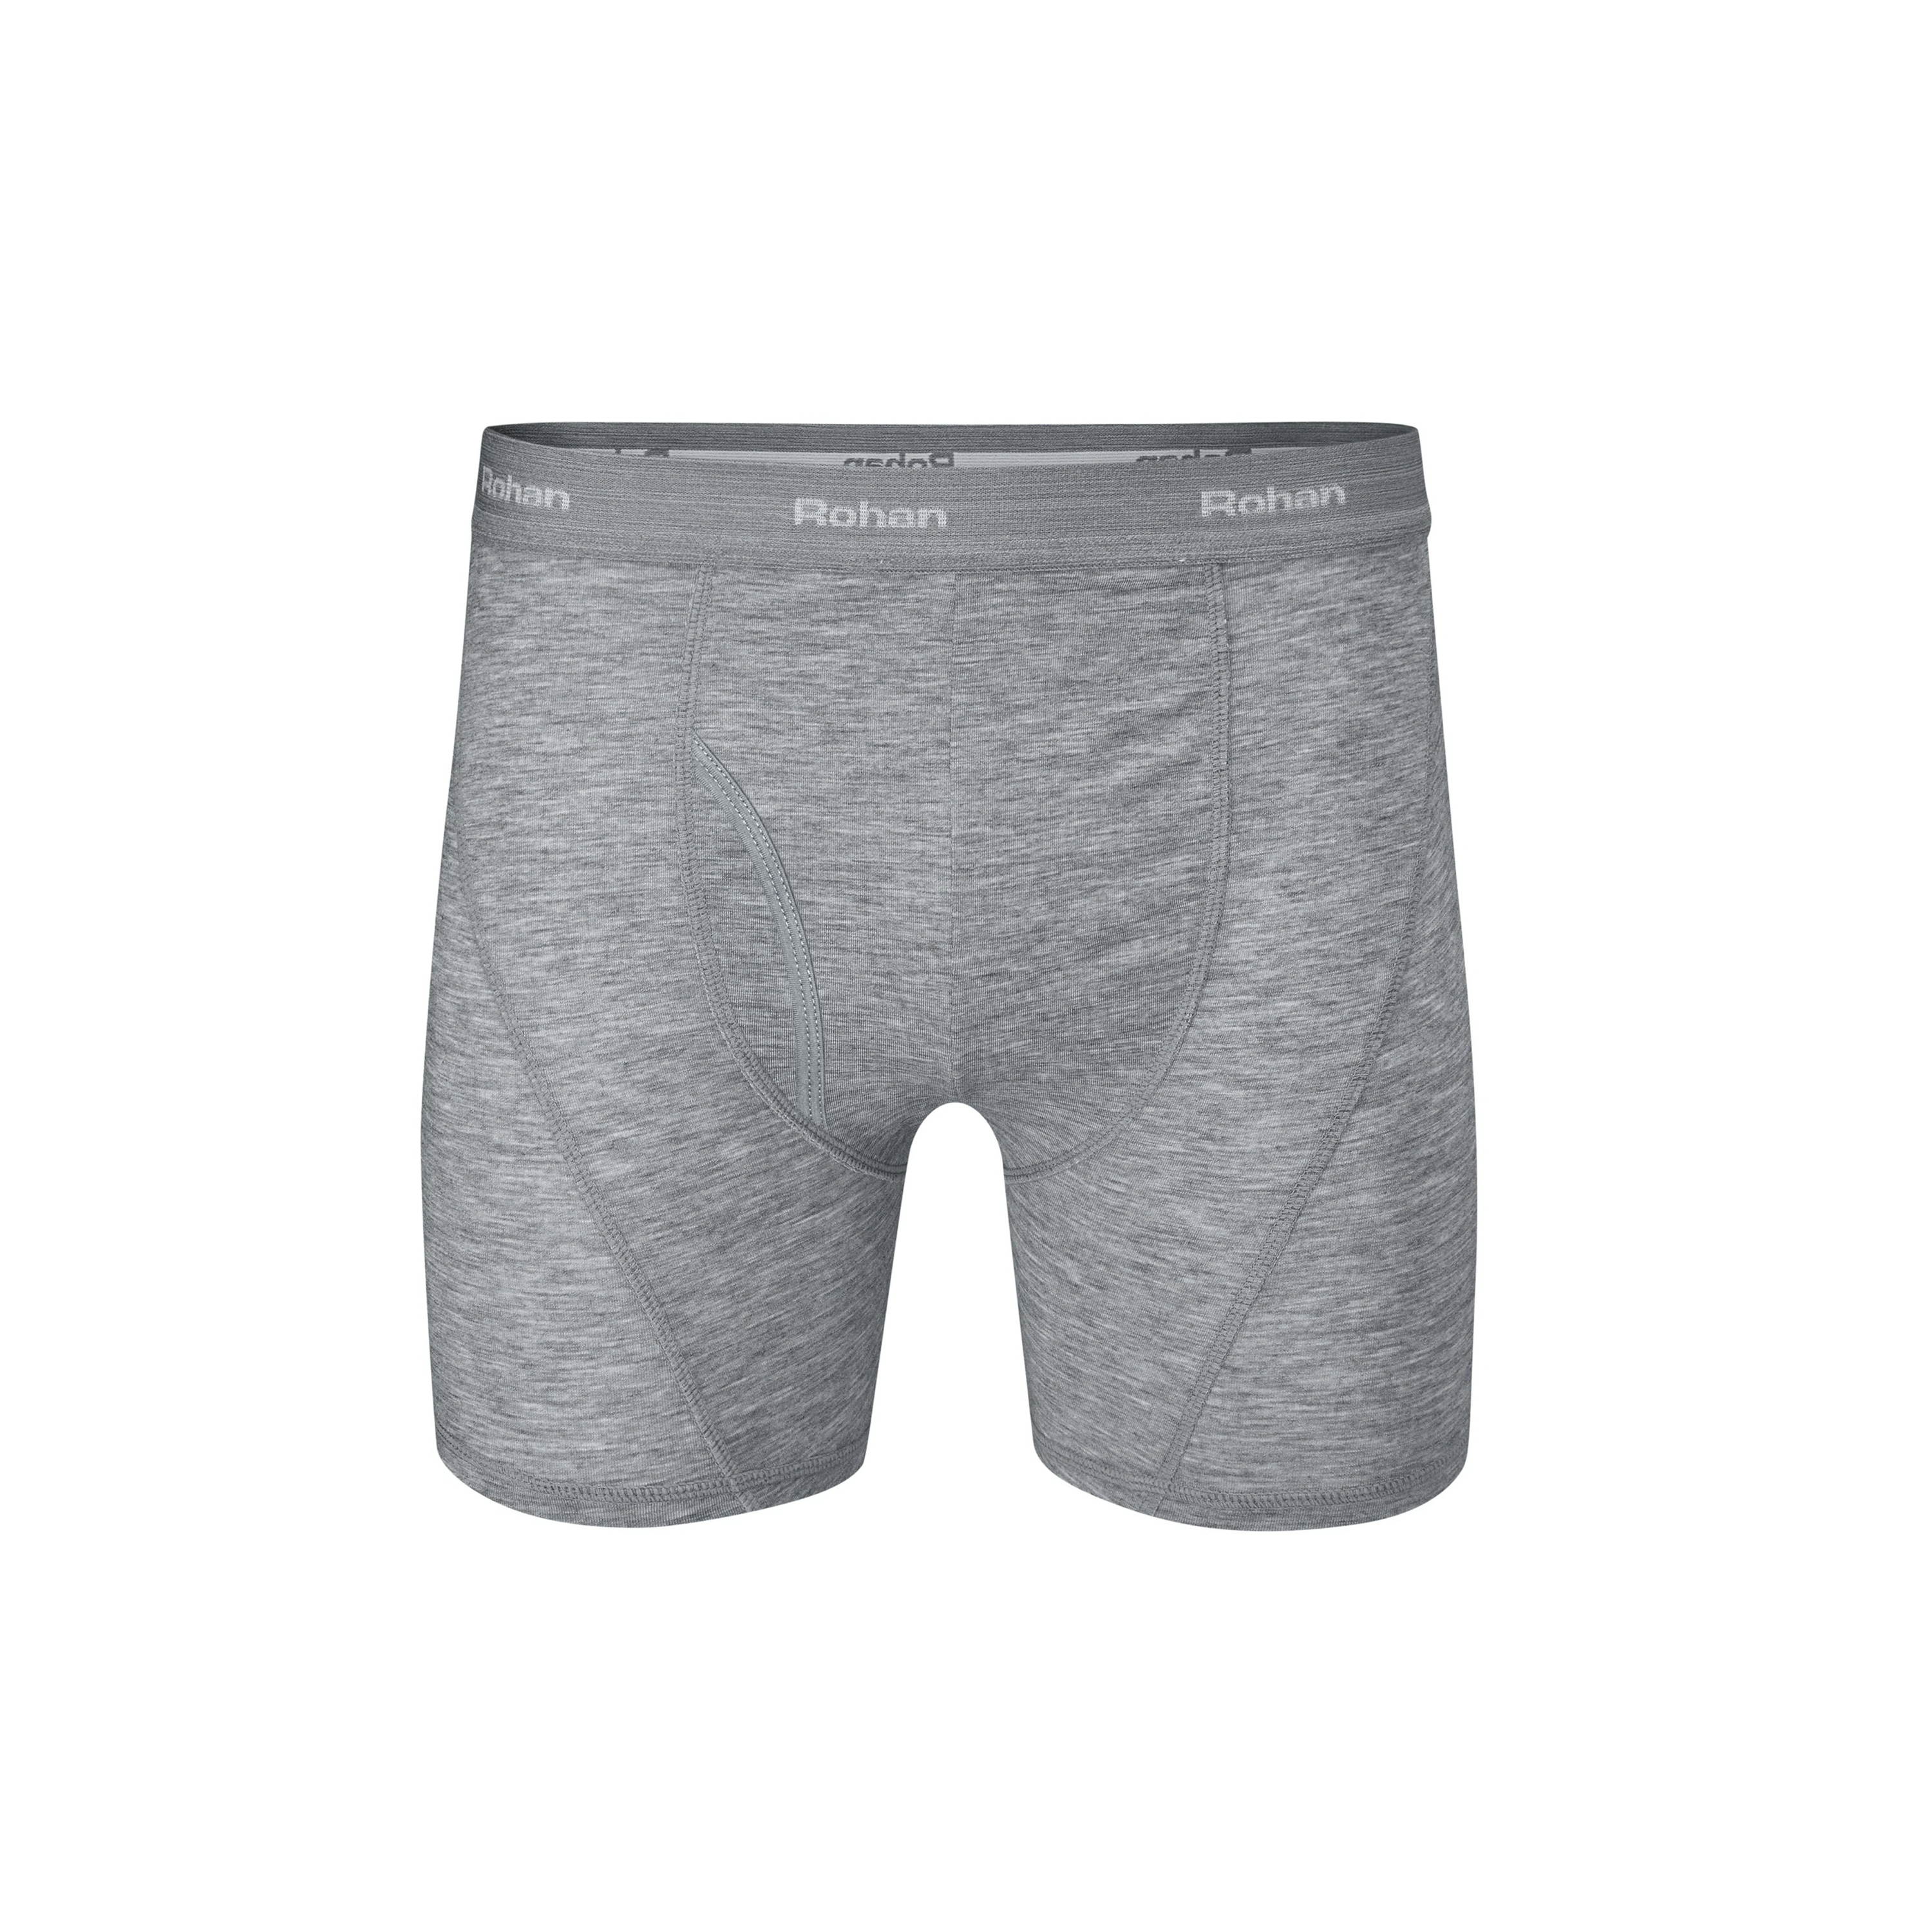 Men’s Aether Boxers with Fly Opening